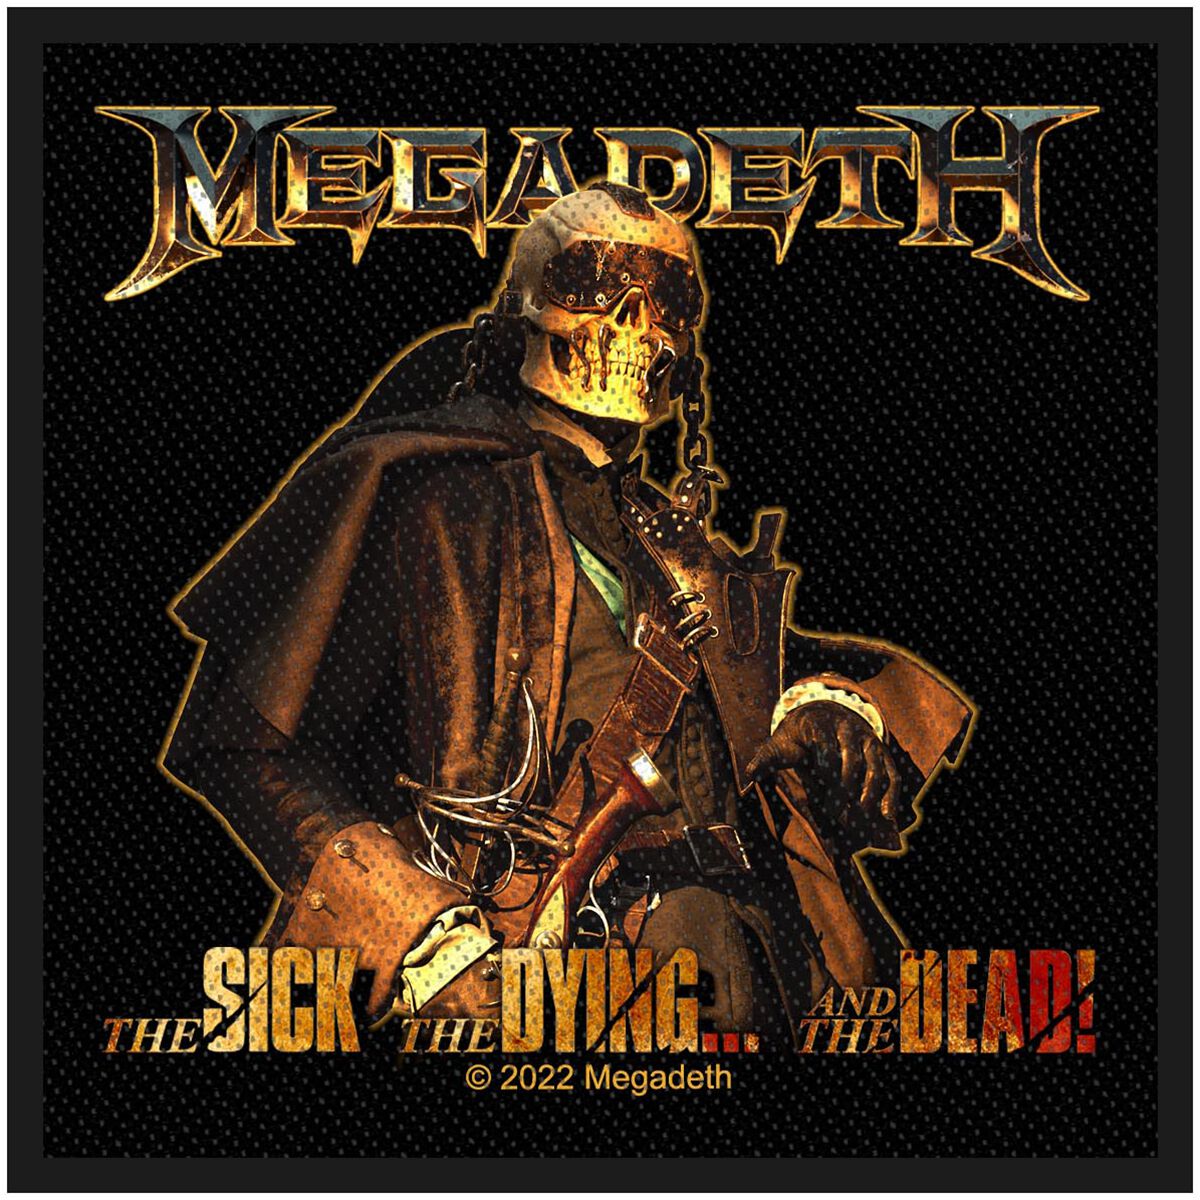 Megadeth Patch - The Sick, The Dying… And The Dead! - multicolor  - Lizenziertes Merchandise!